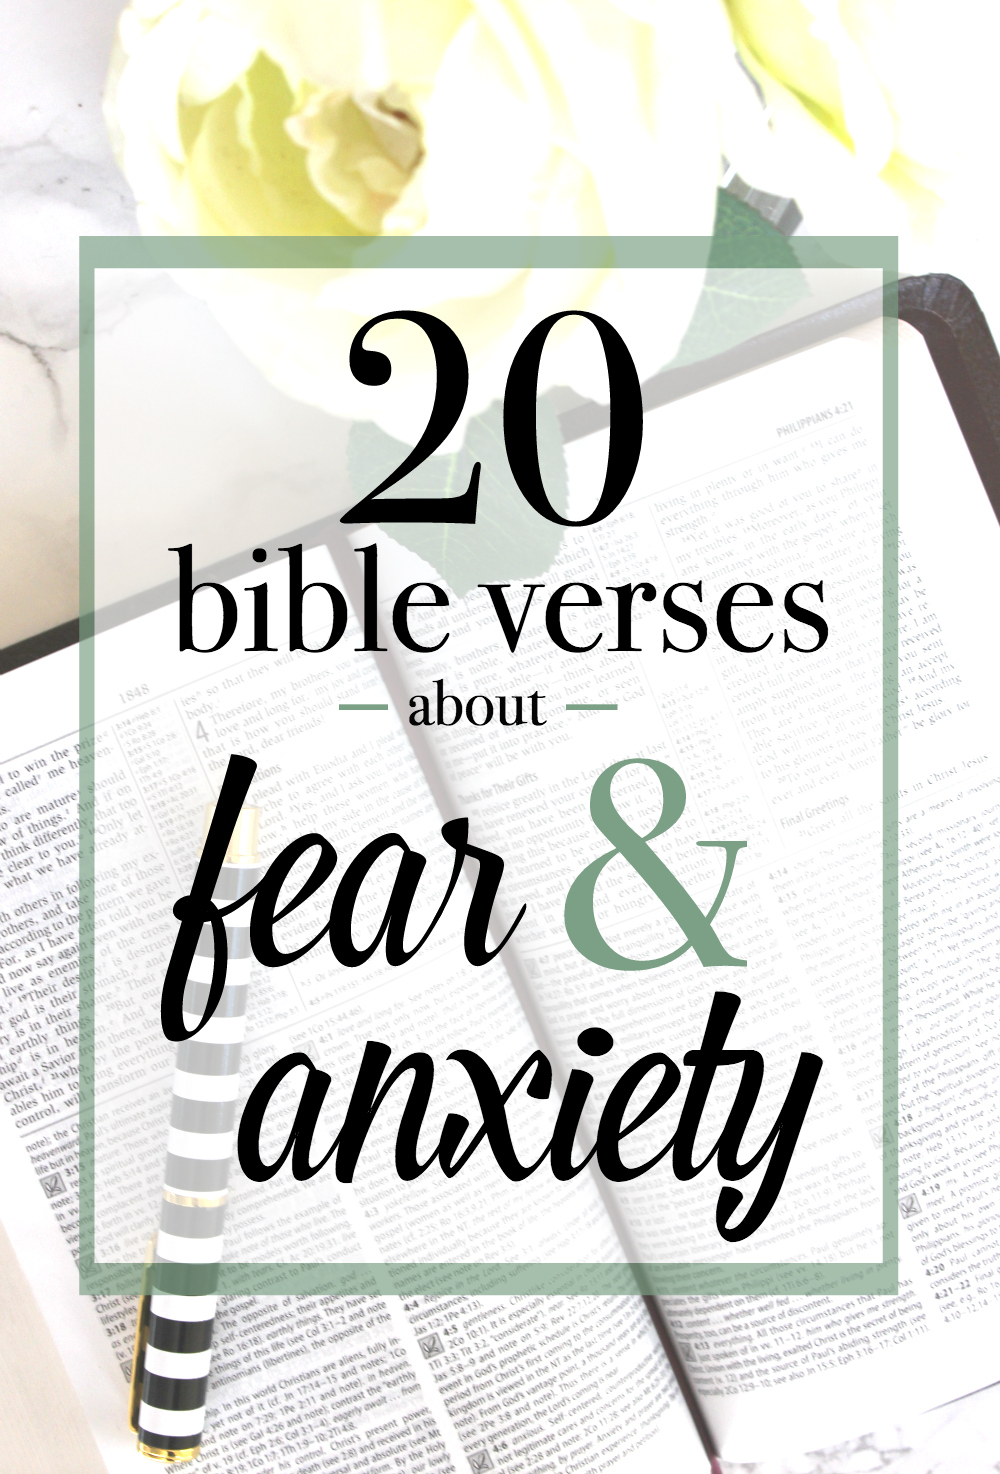 20 Bible Verses about Anxiety and Fear by mental health and eating disorder awareness advocate Stephanie Ziajka from the blog Diary of a Debutante